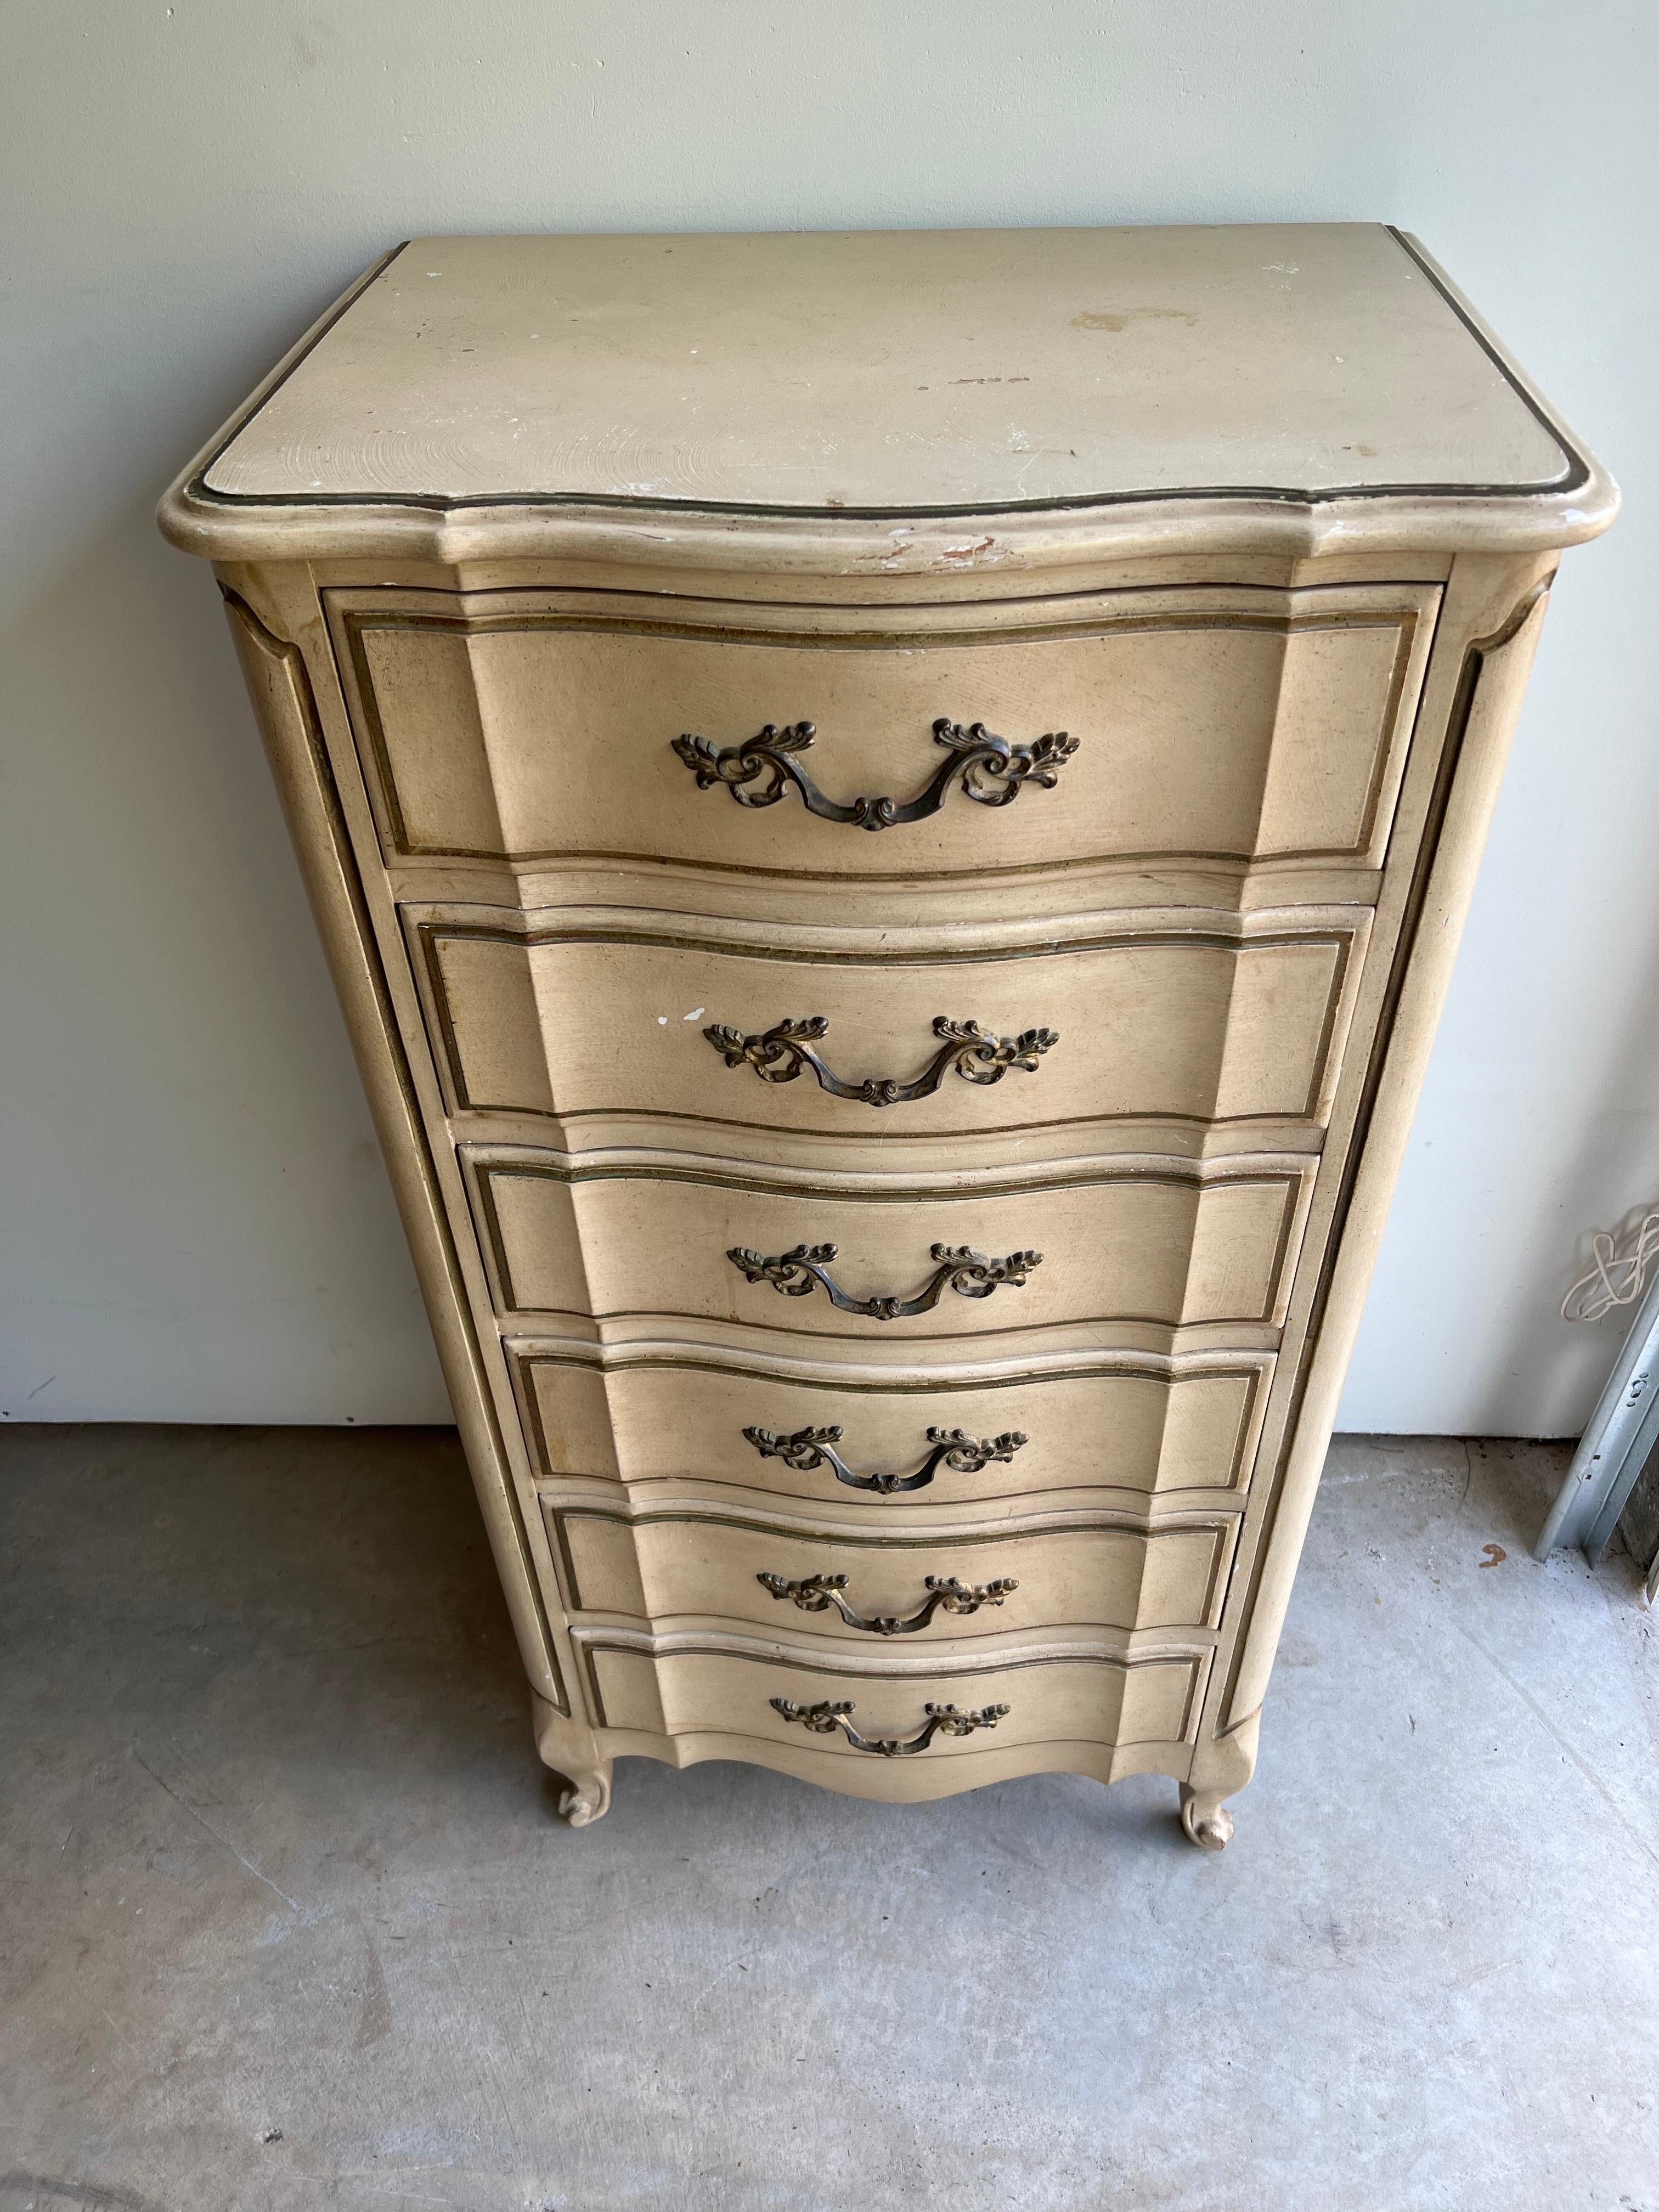 Henry Link Style Lingerie dresser or Semanier. Made by White Furniture. Solid wooden construction. All dovetalied drawers. Could use a repaint. Scuff on top front area. See photos.